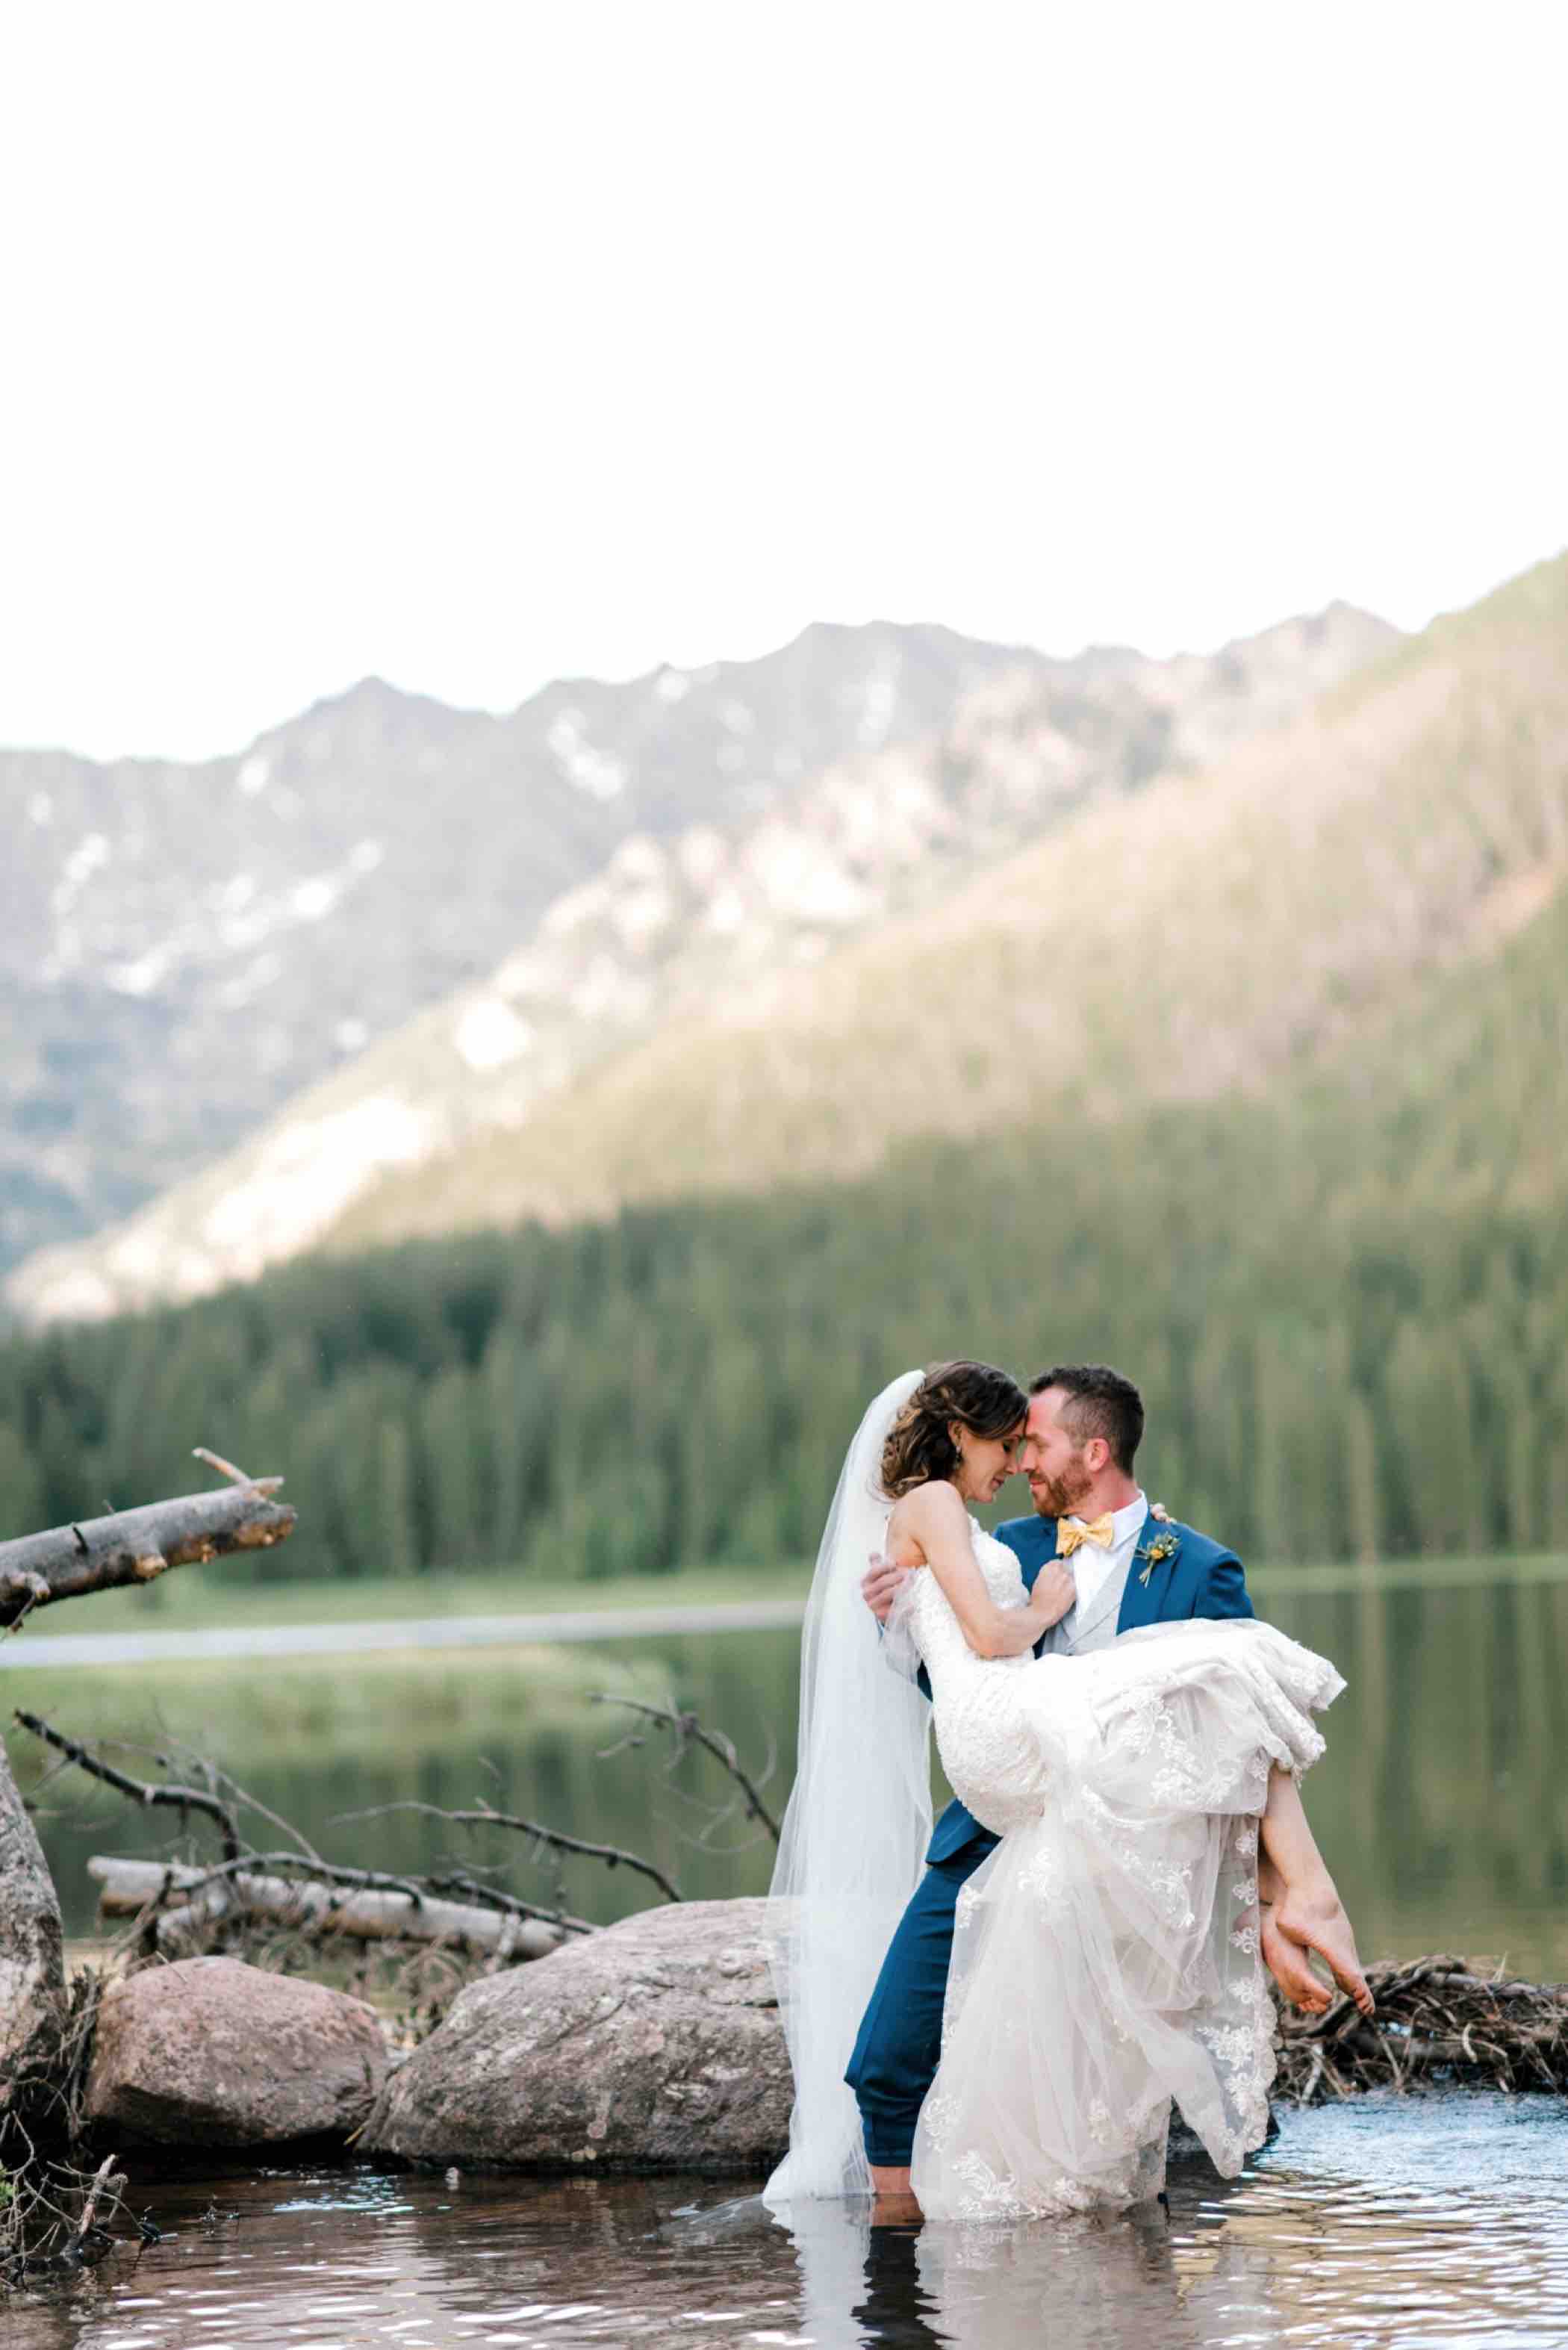 Bride and groom water portraits at Piney River Ranch in Vail, Colroado. Photo by Ali and Garrett, Romantic, Adventurous, Nostalgic Wedding Photographers.